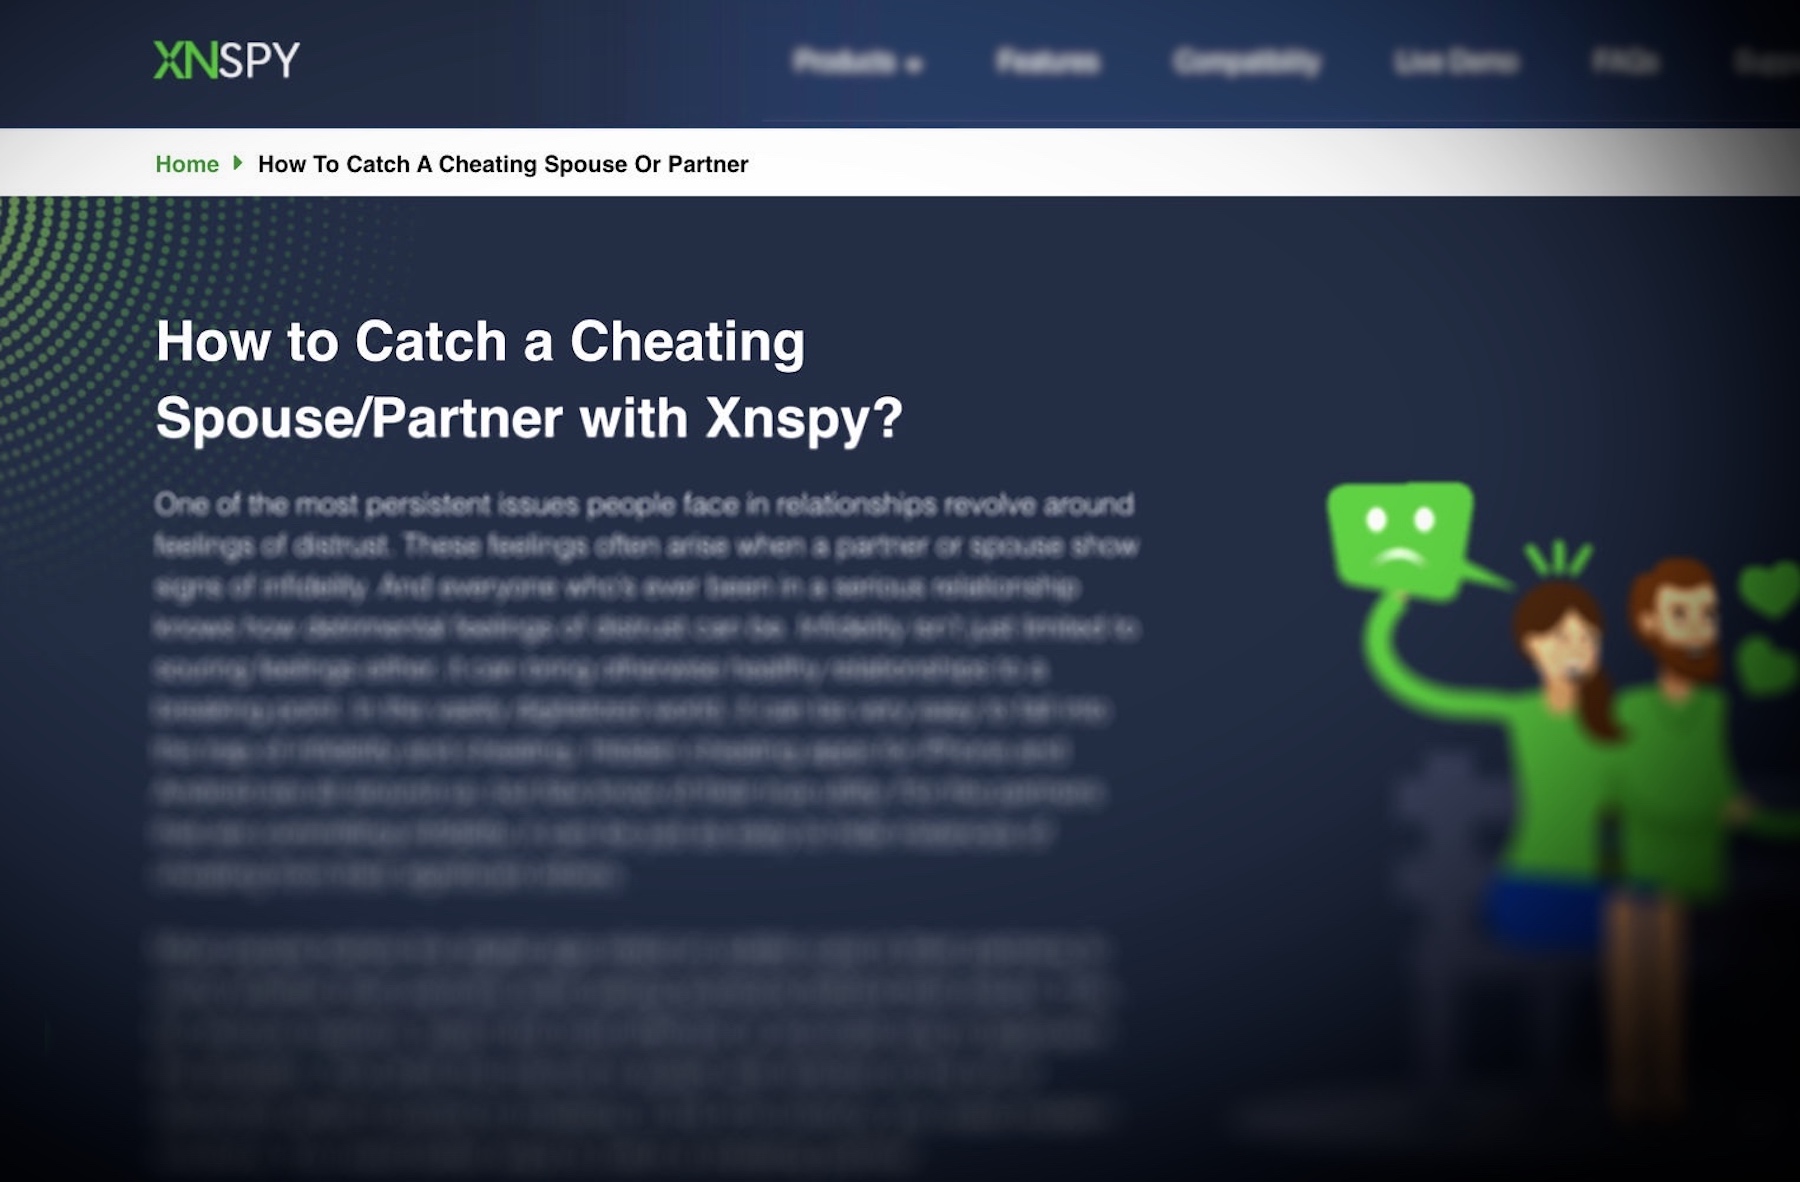 Xnspy's website advertising how its phone stalkerware can be used to spy on a person's spouse or partner.